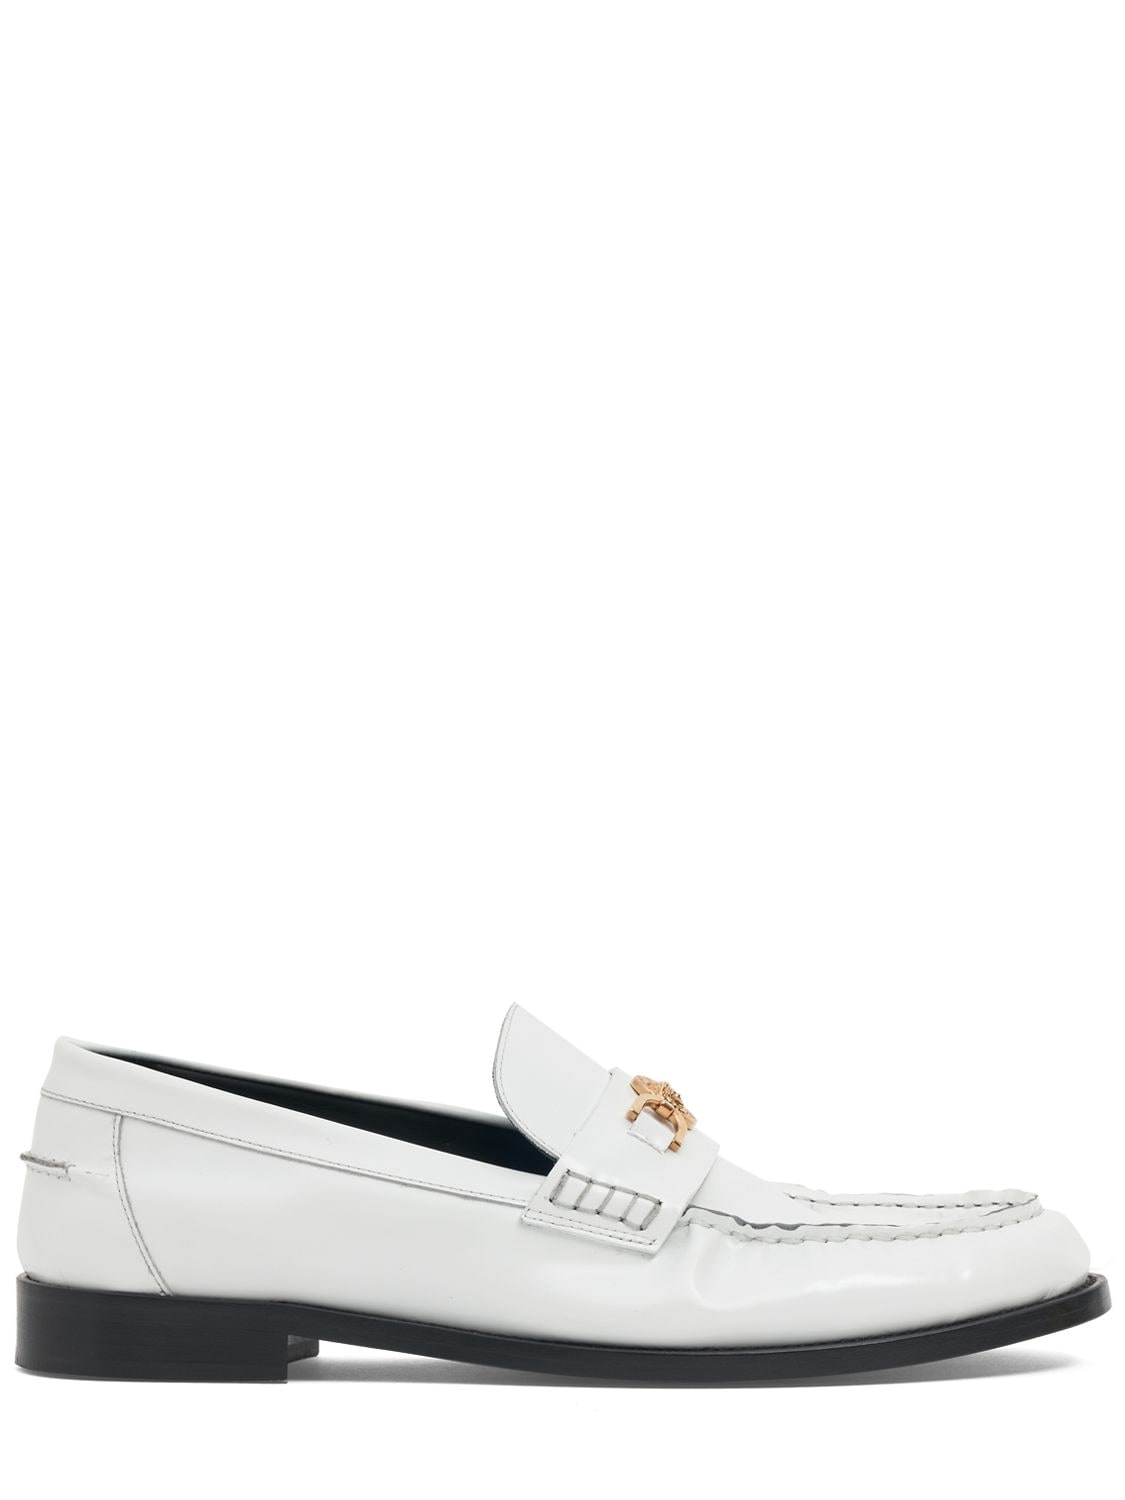 Versace Medusa Leather Loafers In White